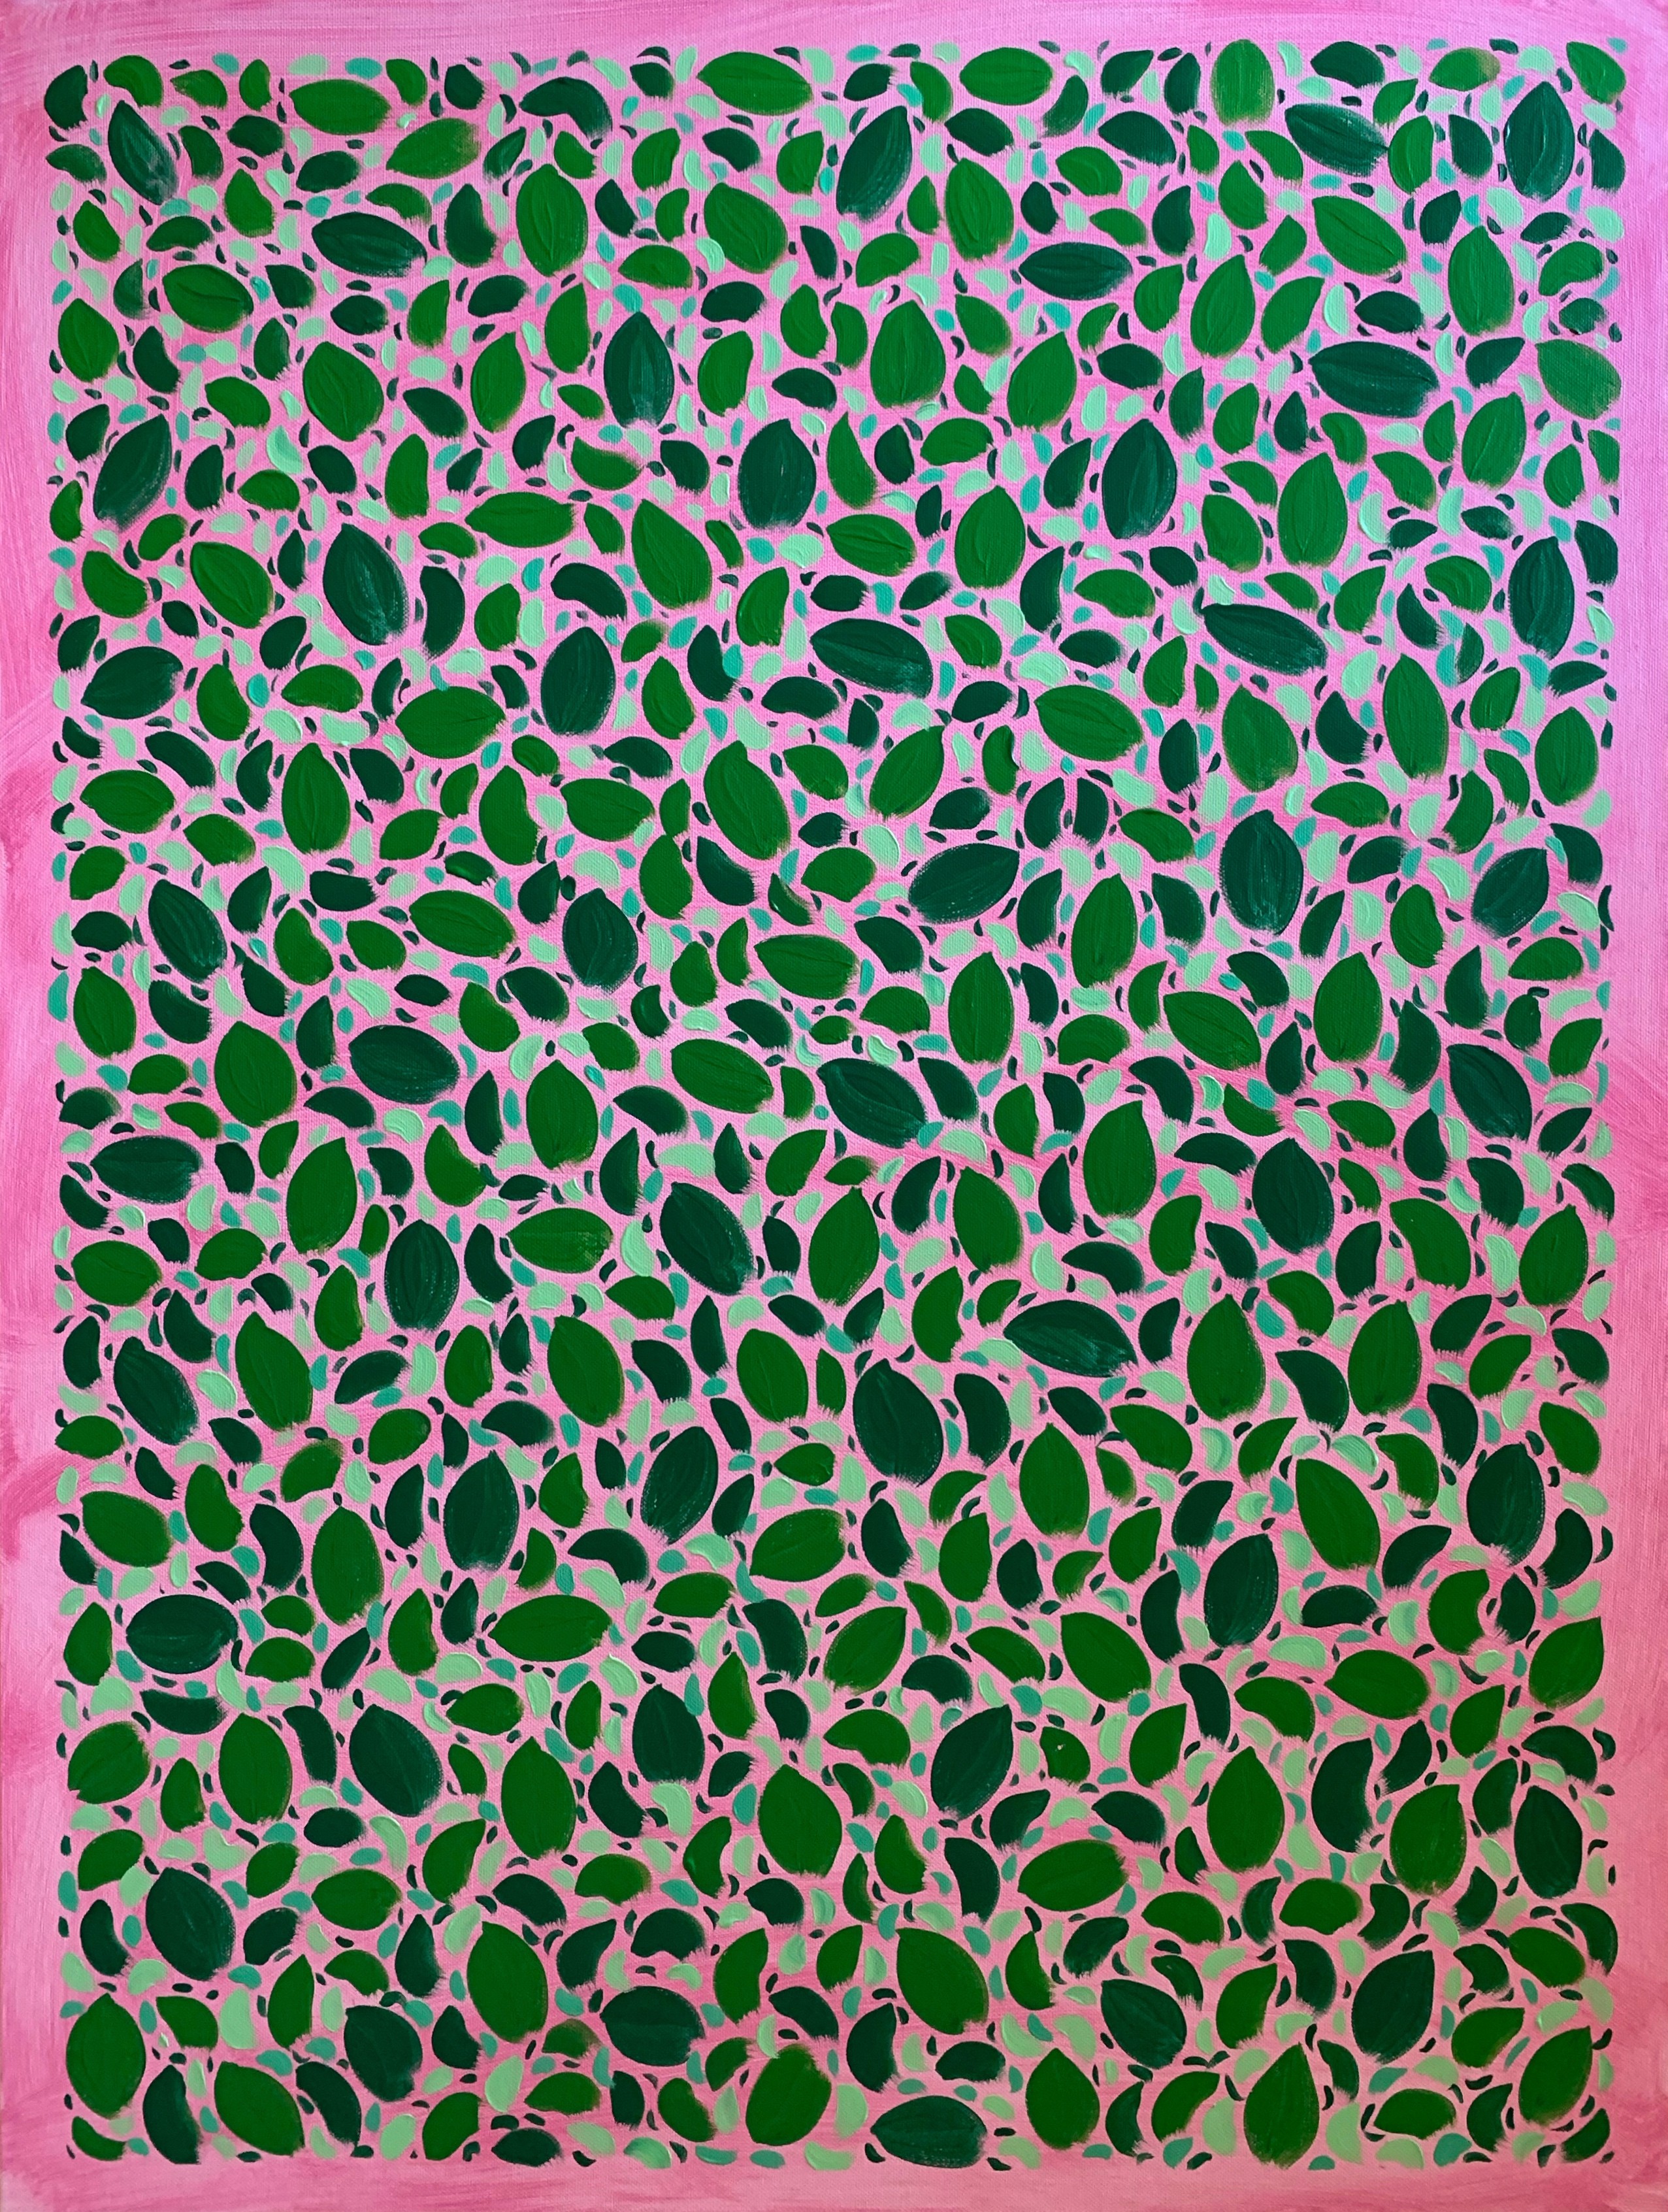 Green with Pink ornament, 2022, Acrylic on canvas, 80*60 cm